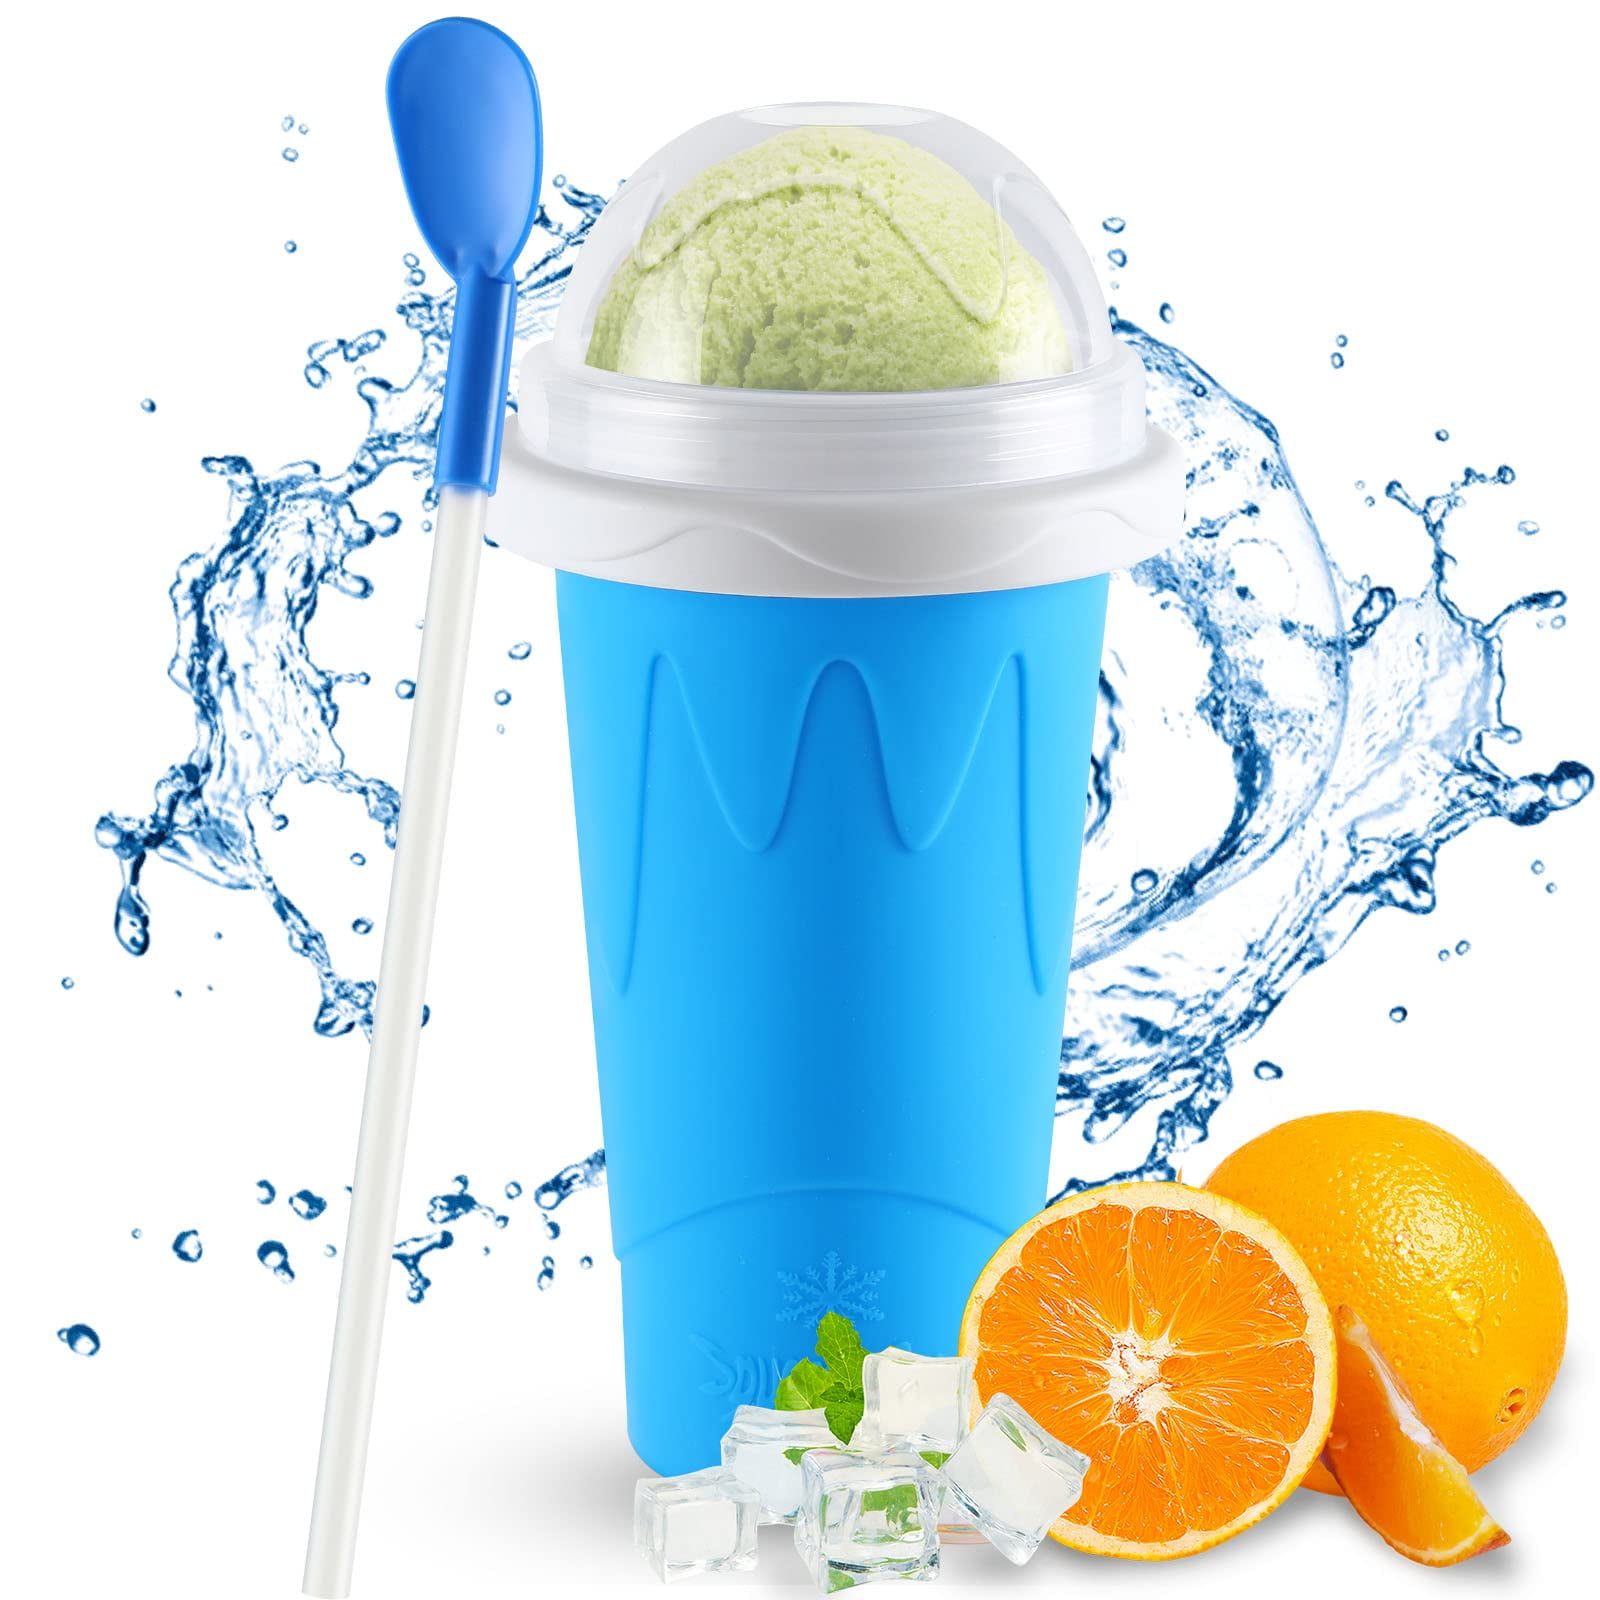 DIY Homemade Freeze Double Layer Drinks Cup for Children Fast Cooling Quick Frozen Smoothies Slushy Ice Cream Maker Milk Shake Maker Cooling Cup Squee Green Magic Slushy Maker Squeeze Cup 